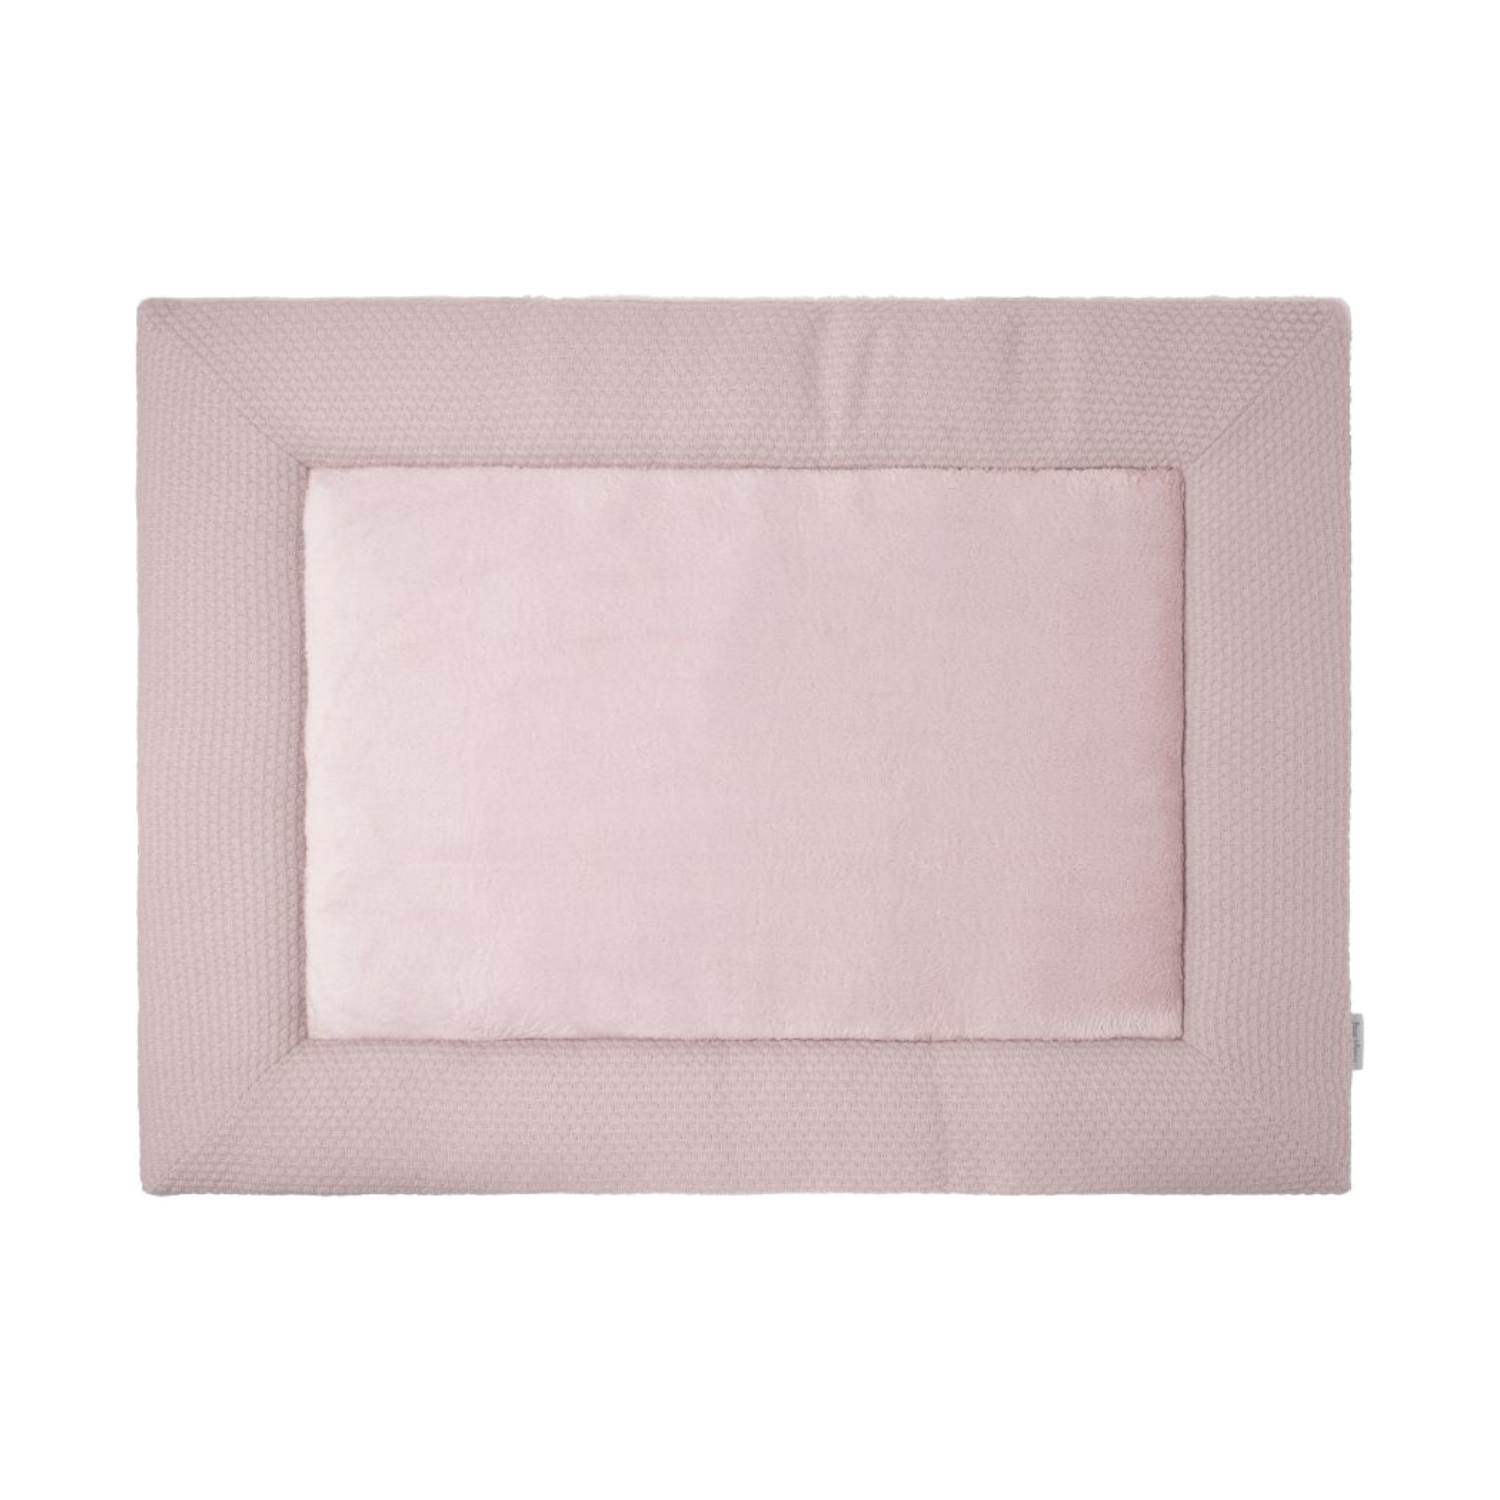 Baby's Only Sky Boxkleed Oud Roze 75 x 95 cm